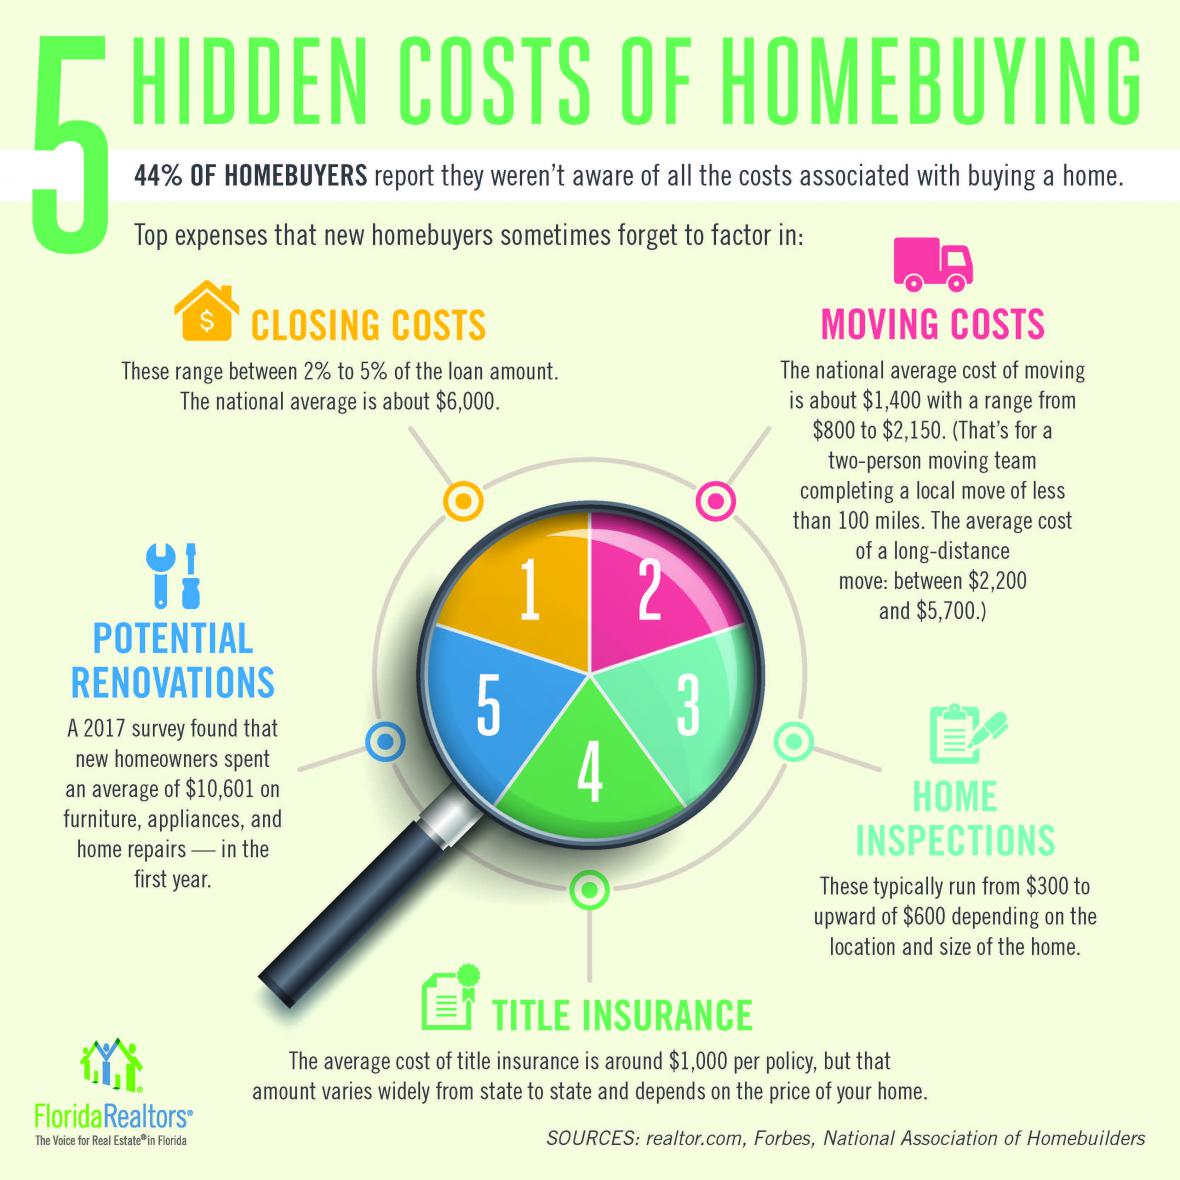 Hidden Costs of Homebuying infographic